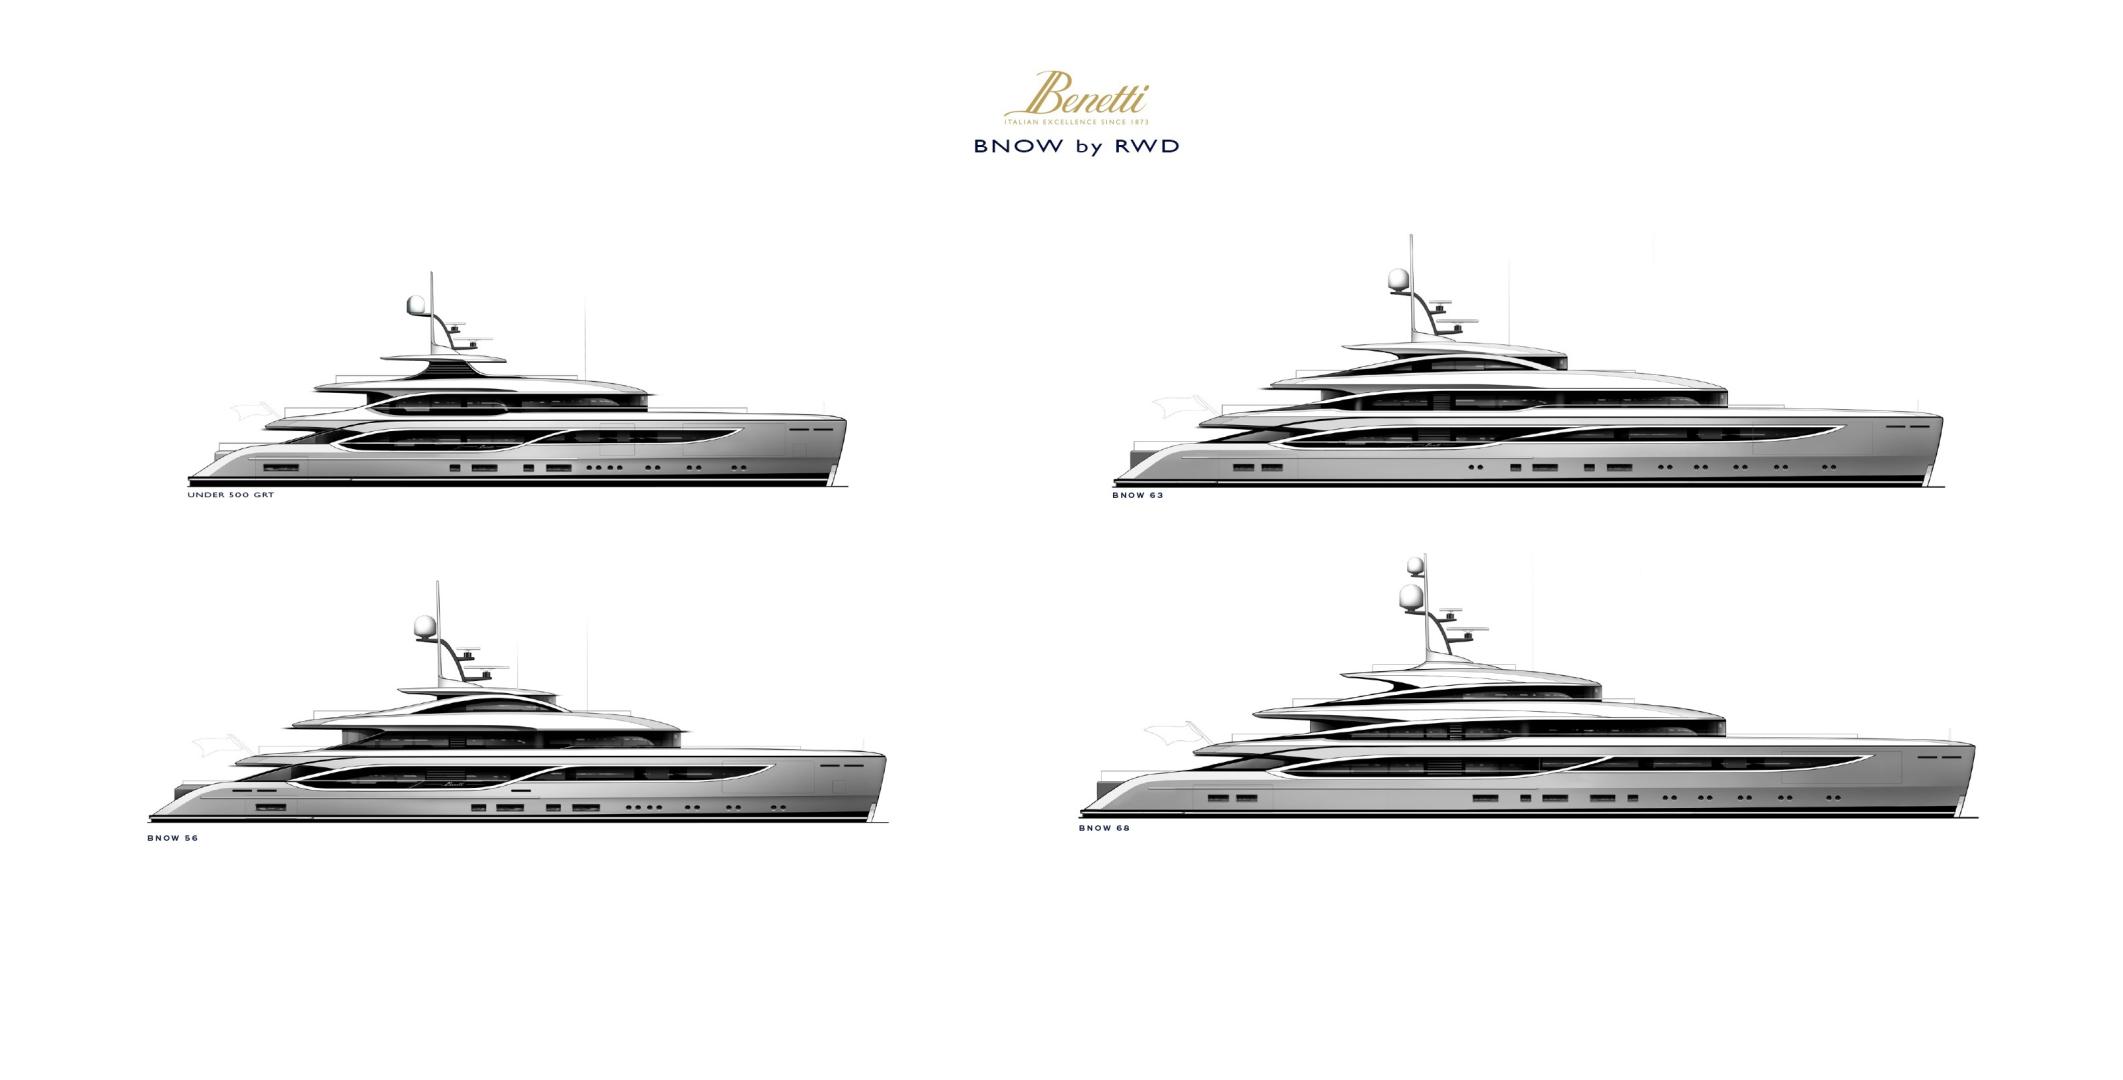 “BNow by RWD”, Benetti's new family of displacement yachts 